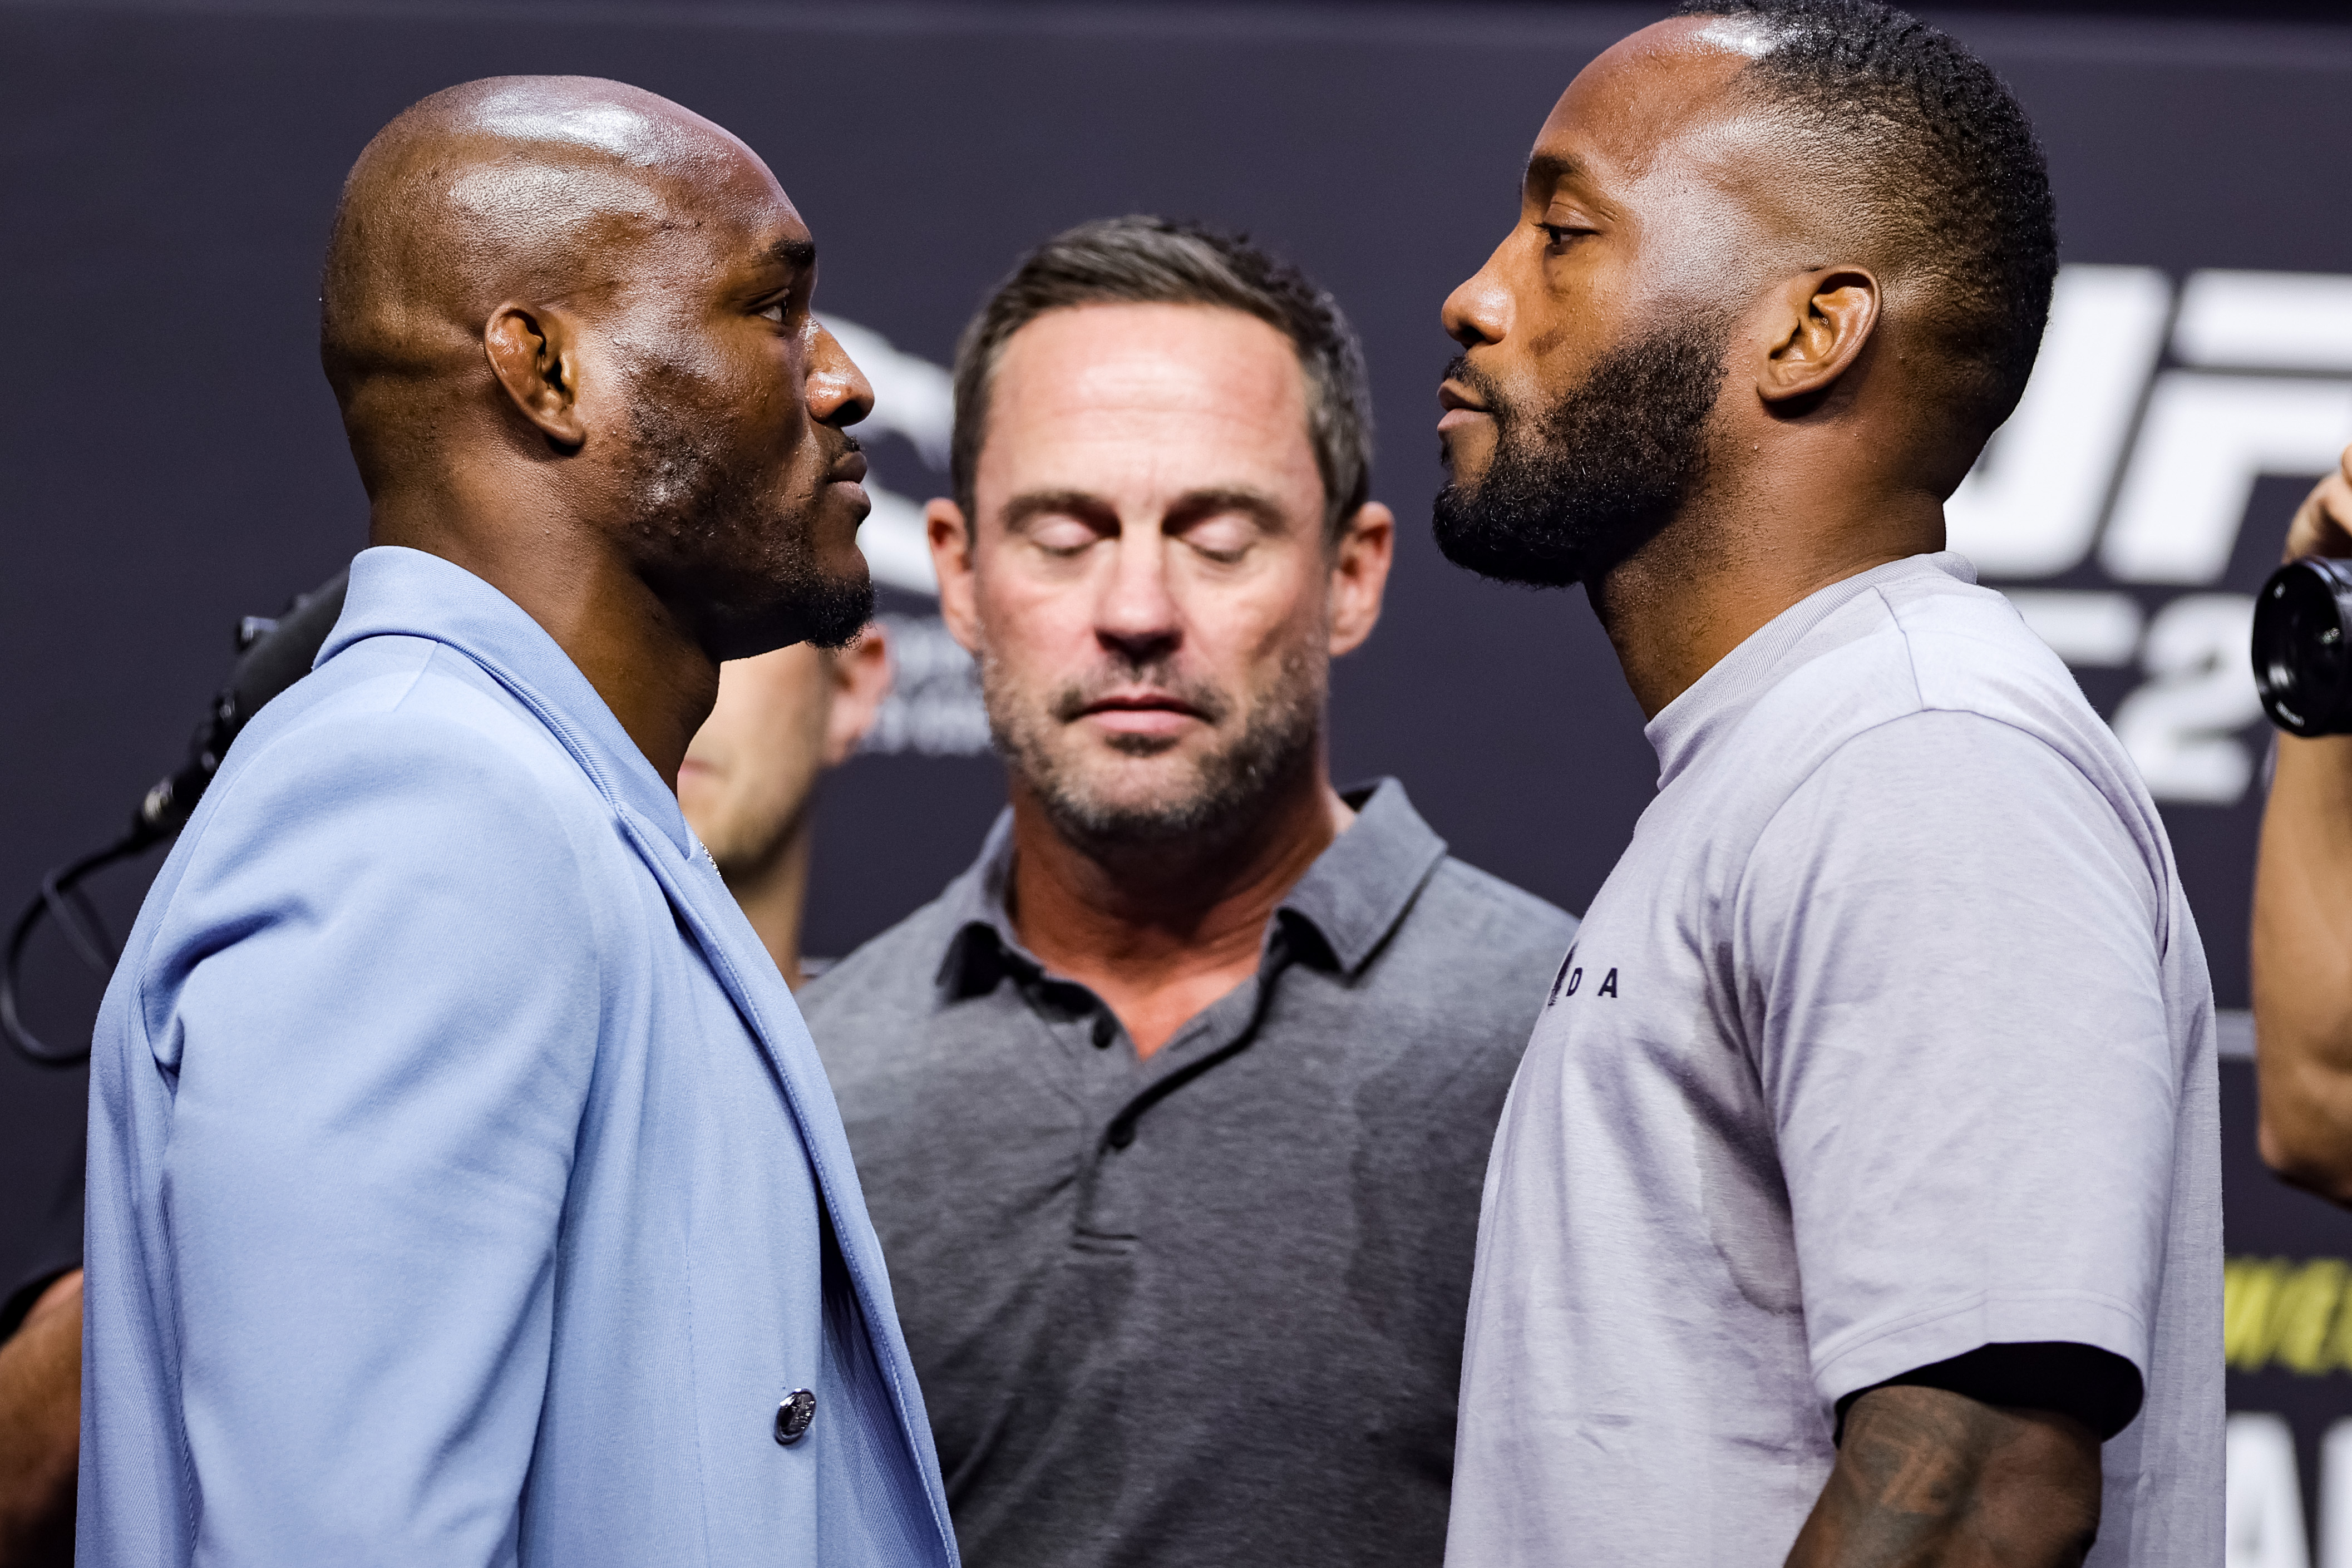 UFC welterweight champion Kamaru Usman and Leon Edwards face off on stage during the UFC 276 ceremonial weigh-in at T-Mobile Arena on July 01, 2022 in Las Vegas, Nevada.